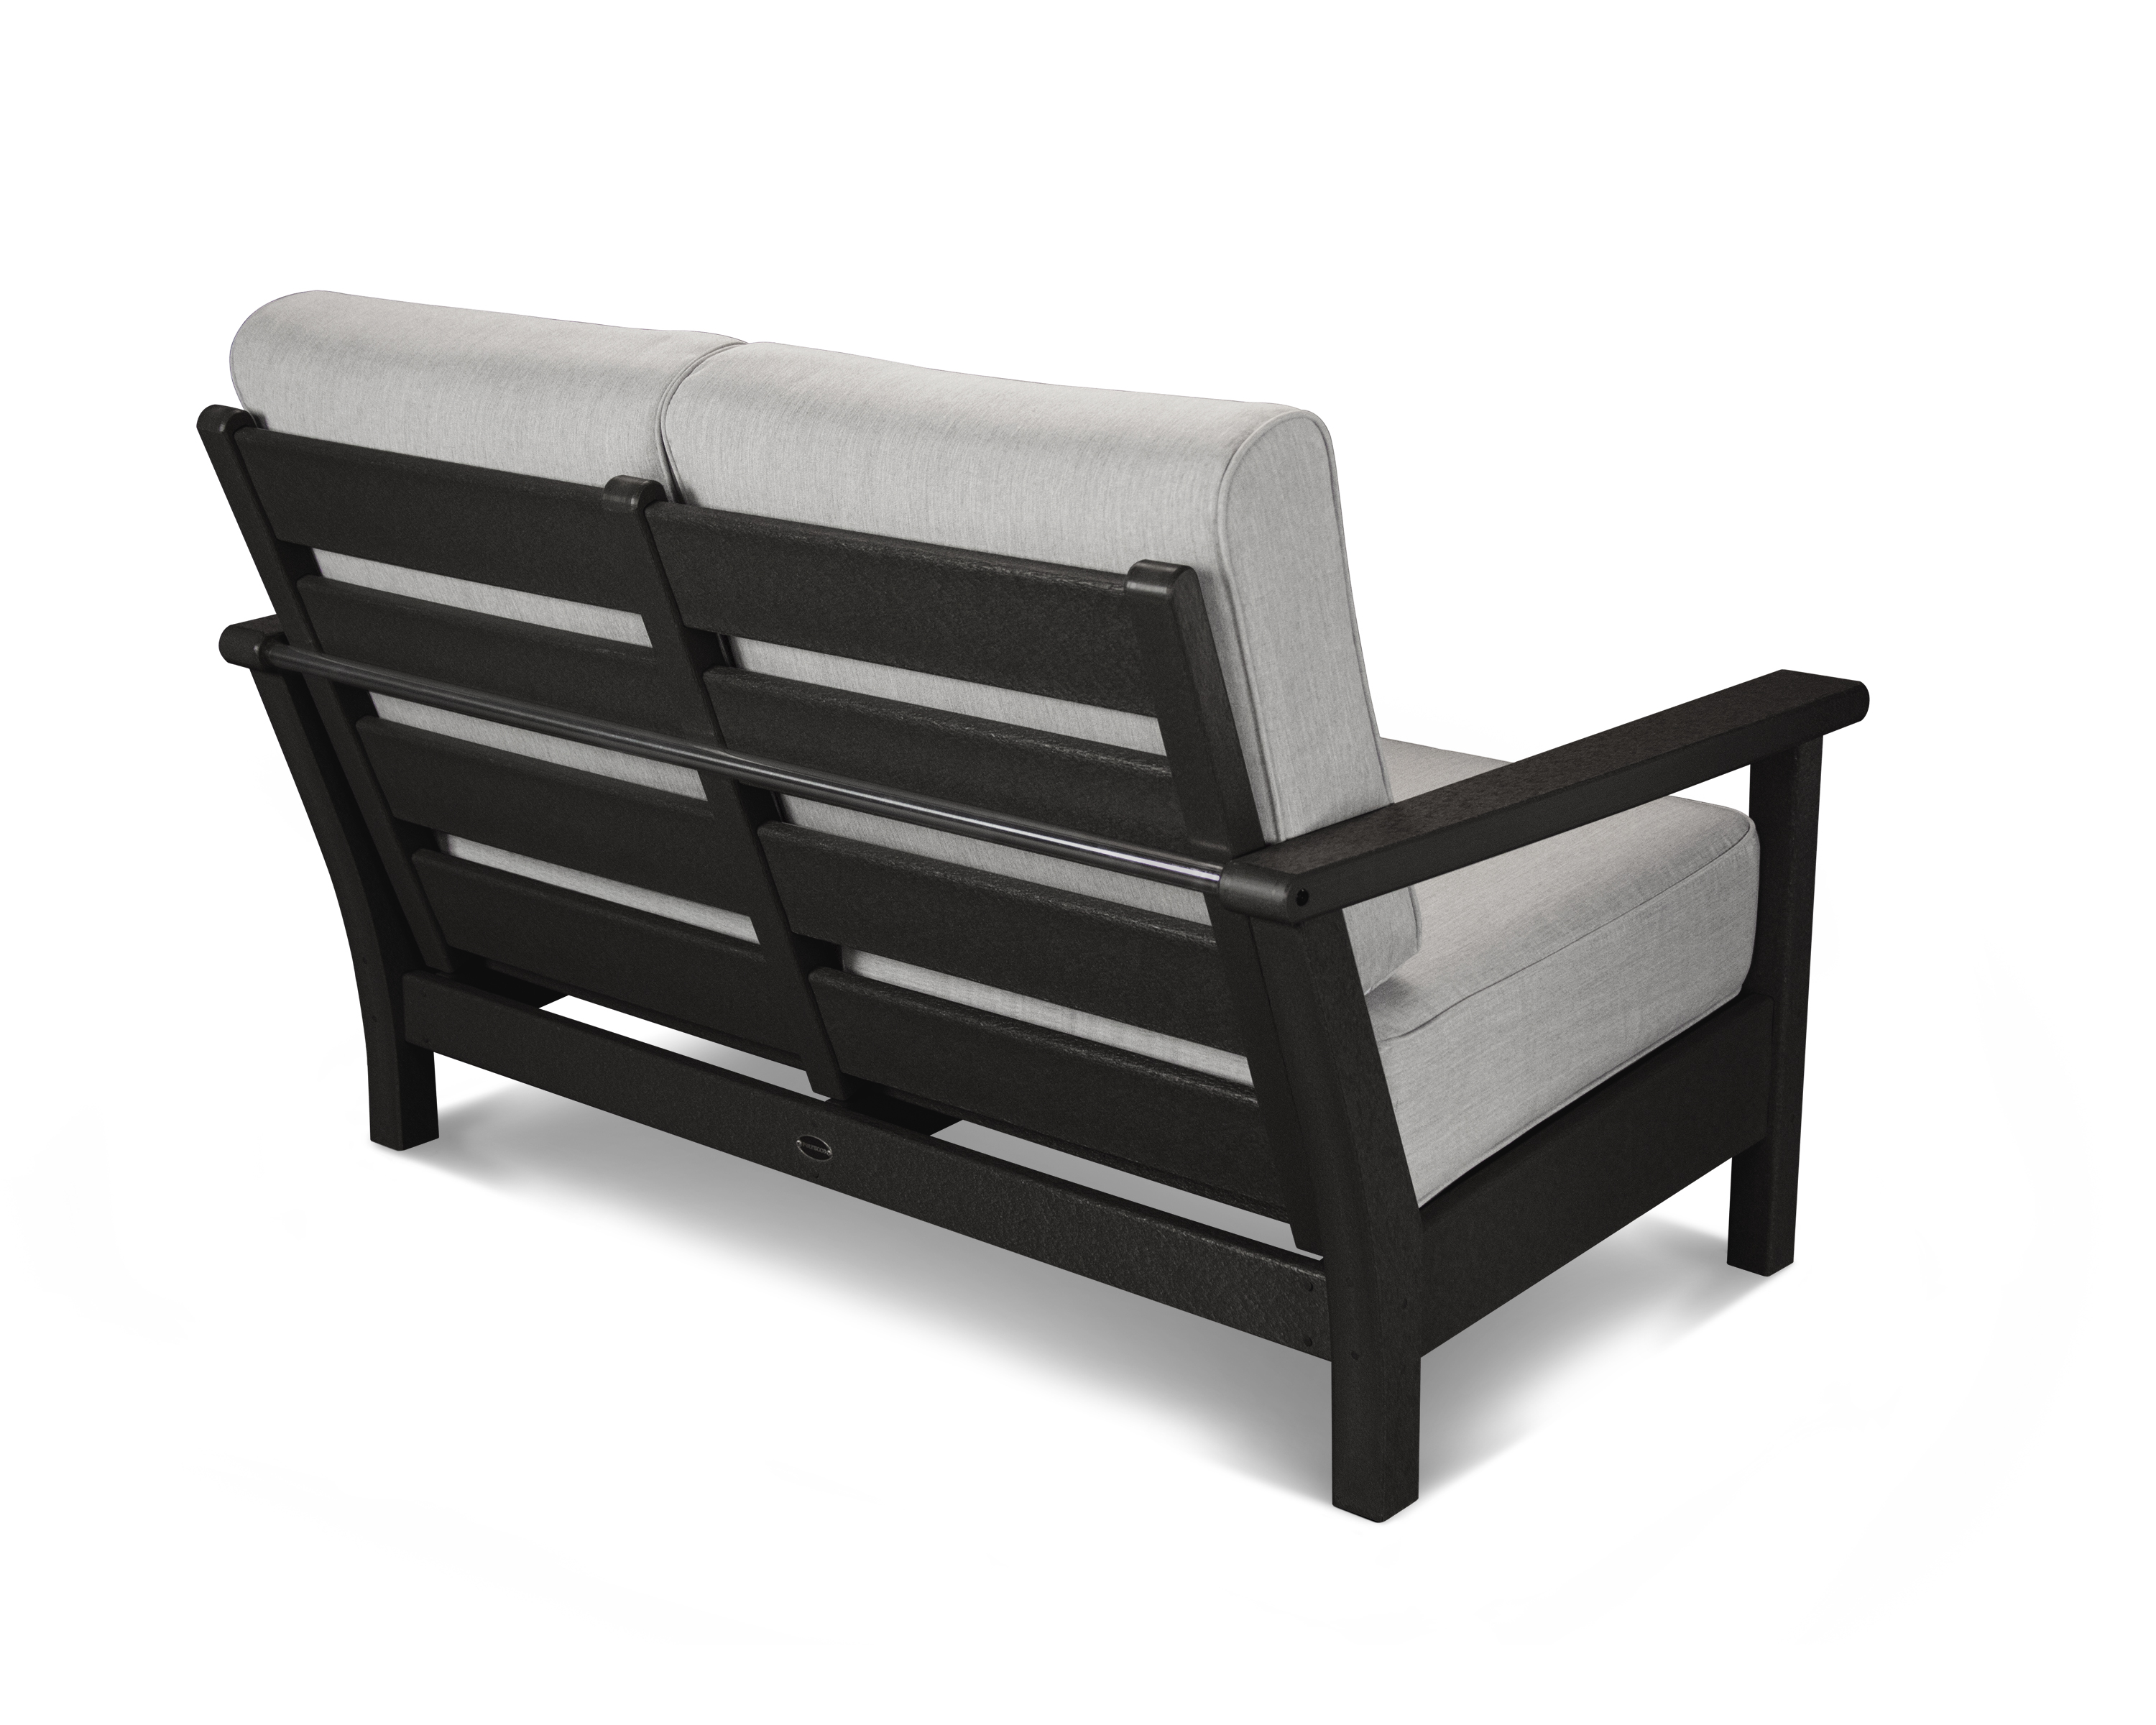 Whether Alone With A Good Book Or Together With A Loved One, This Settee Is The Perfect Addition To Your Outdoor Living Area. The Harbour Collection Settee Is A Welcoming Piece Of Furniture That Encourages You And Your Guests To Stay Outside And Relax. Co